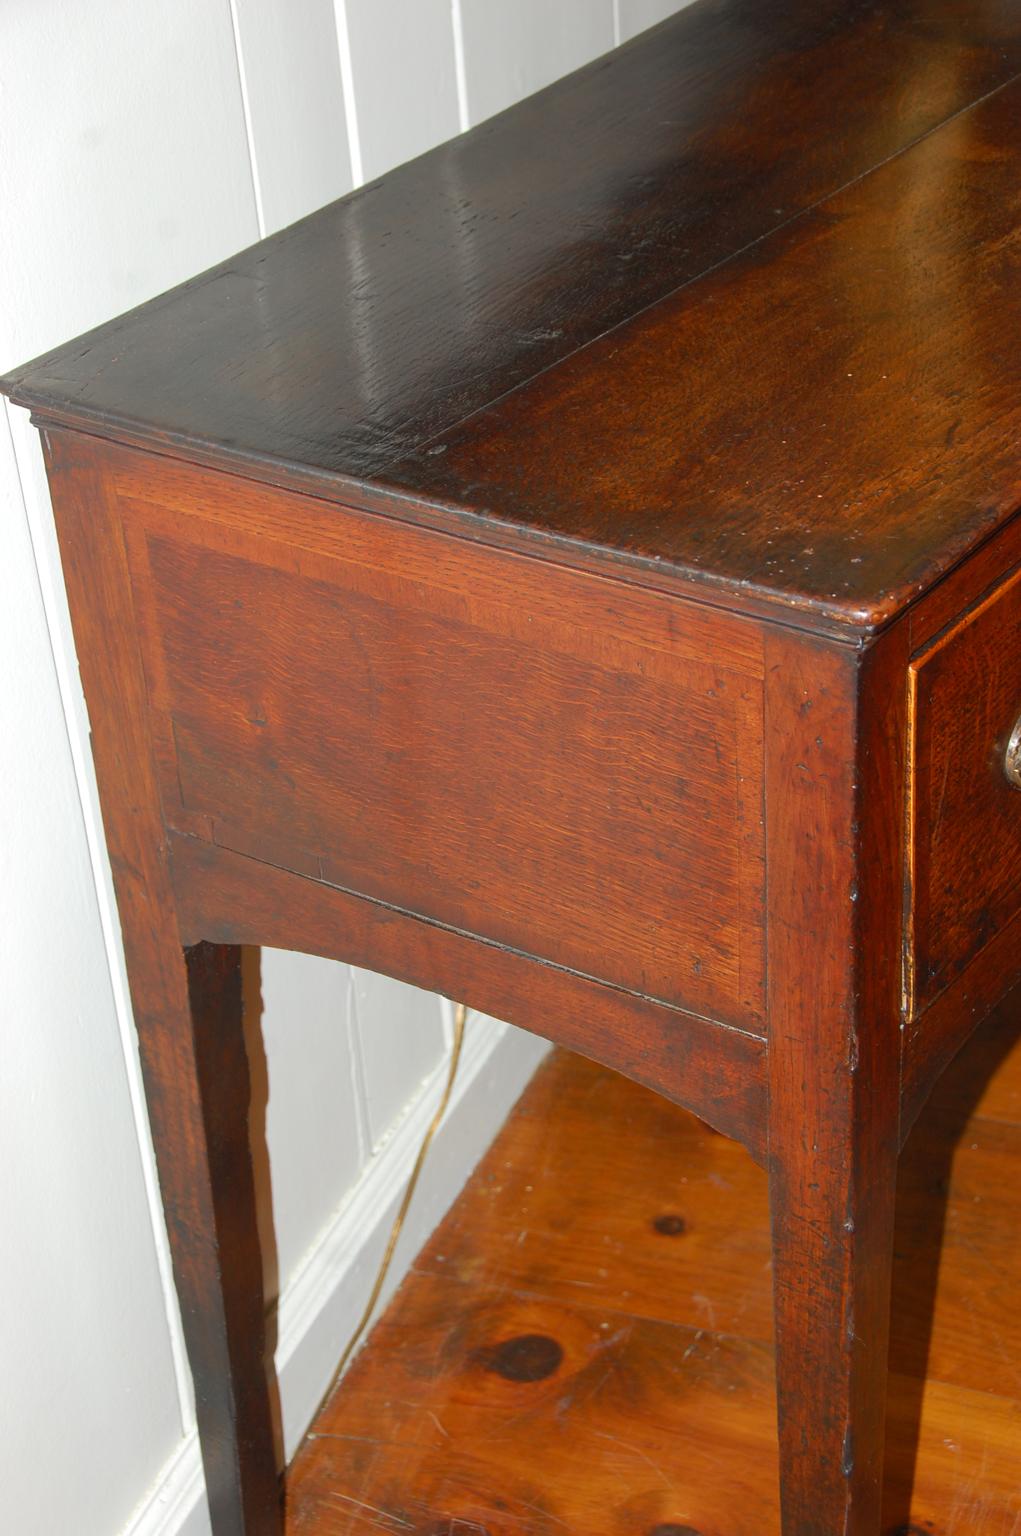 English Georgian Period Oak Low Dresser with Three Drawers Tapered Legs (Englisch)